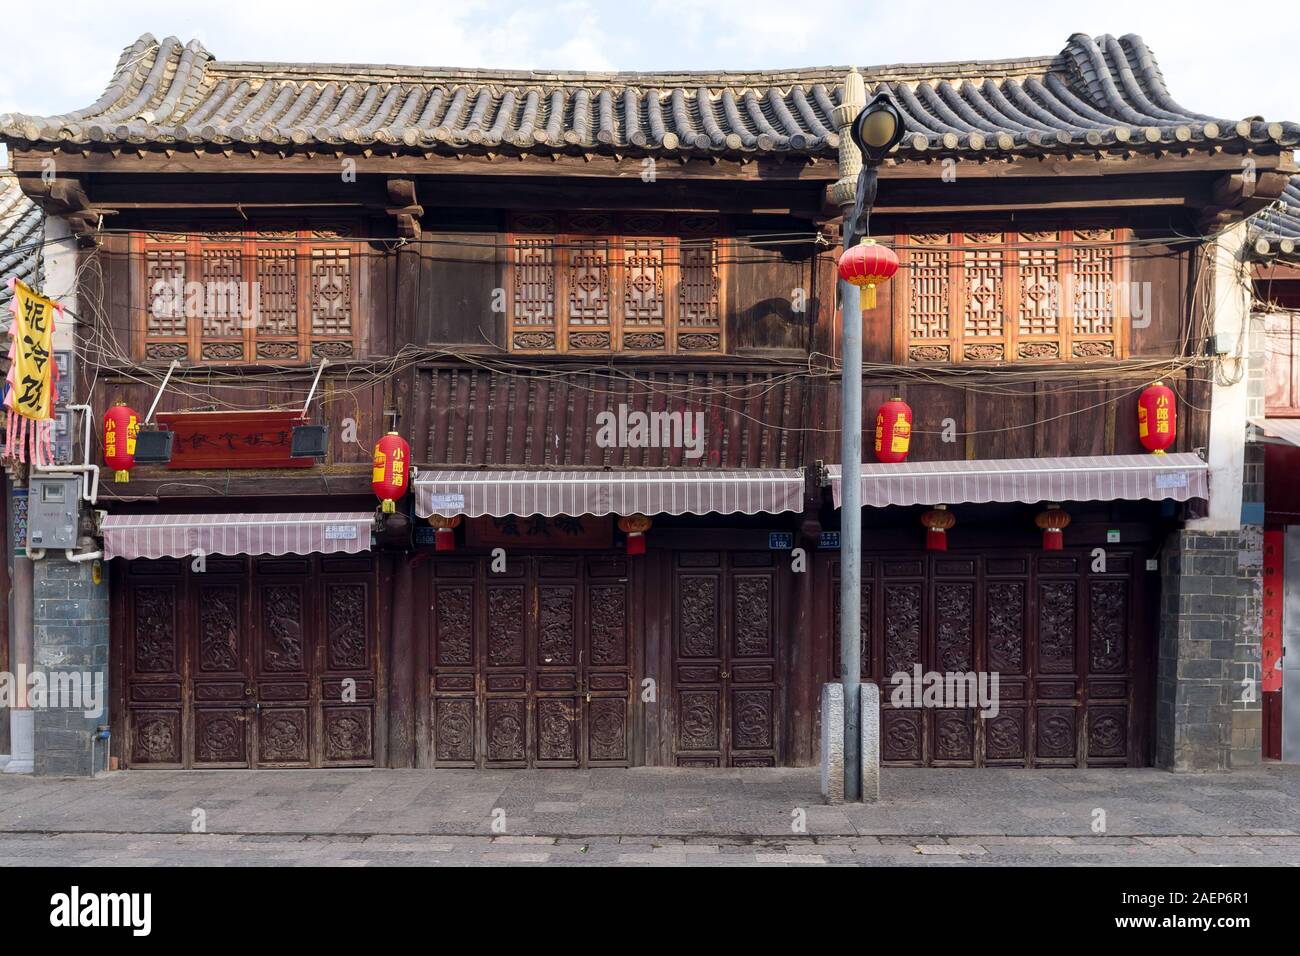 March 8, 2019: Facade of a building in the historic center of the city of Jianshui, Yunnan, China Stock Photo